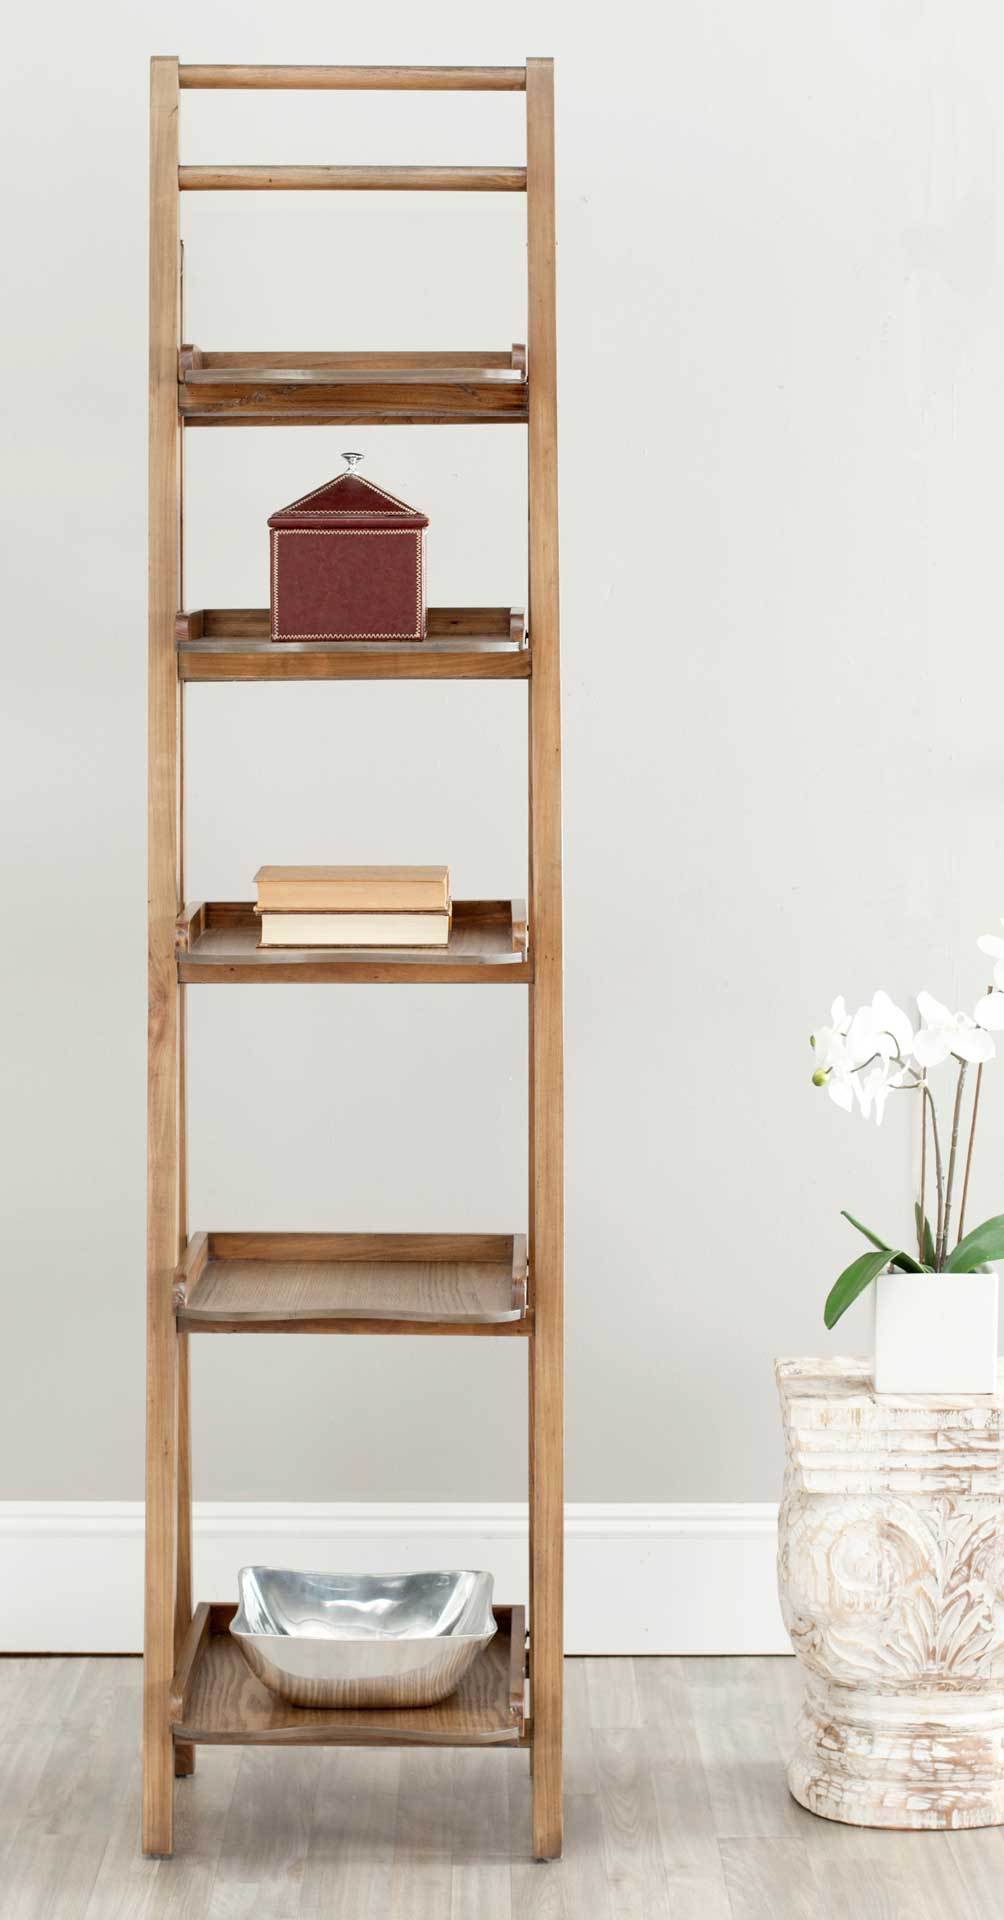 Ashley Leaning 5 Tier Etagere